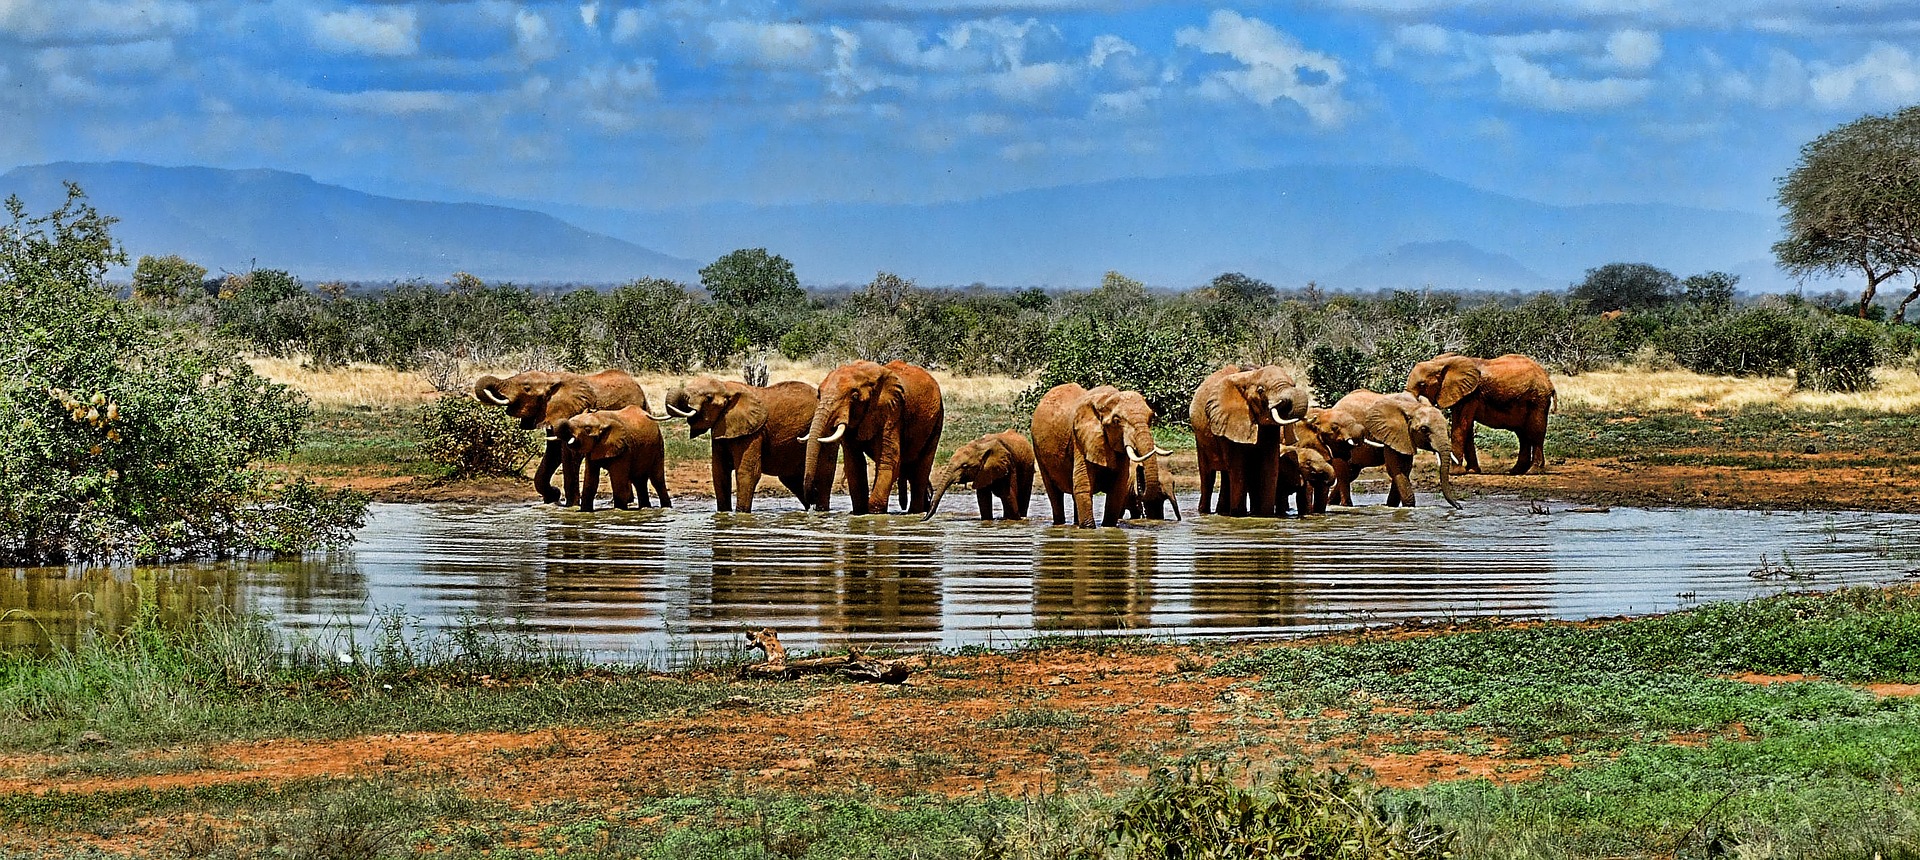 A herd of Elephants drinking water surrounded by grass and trees